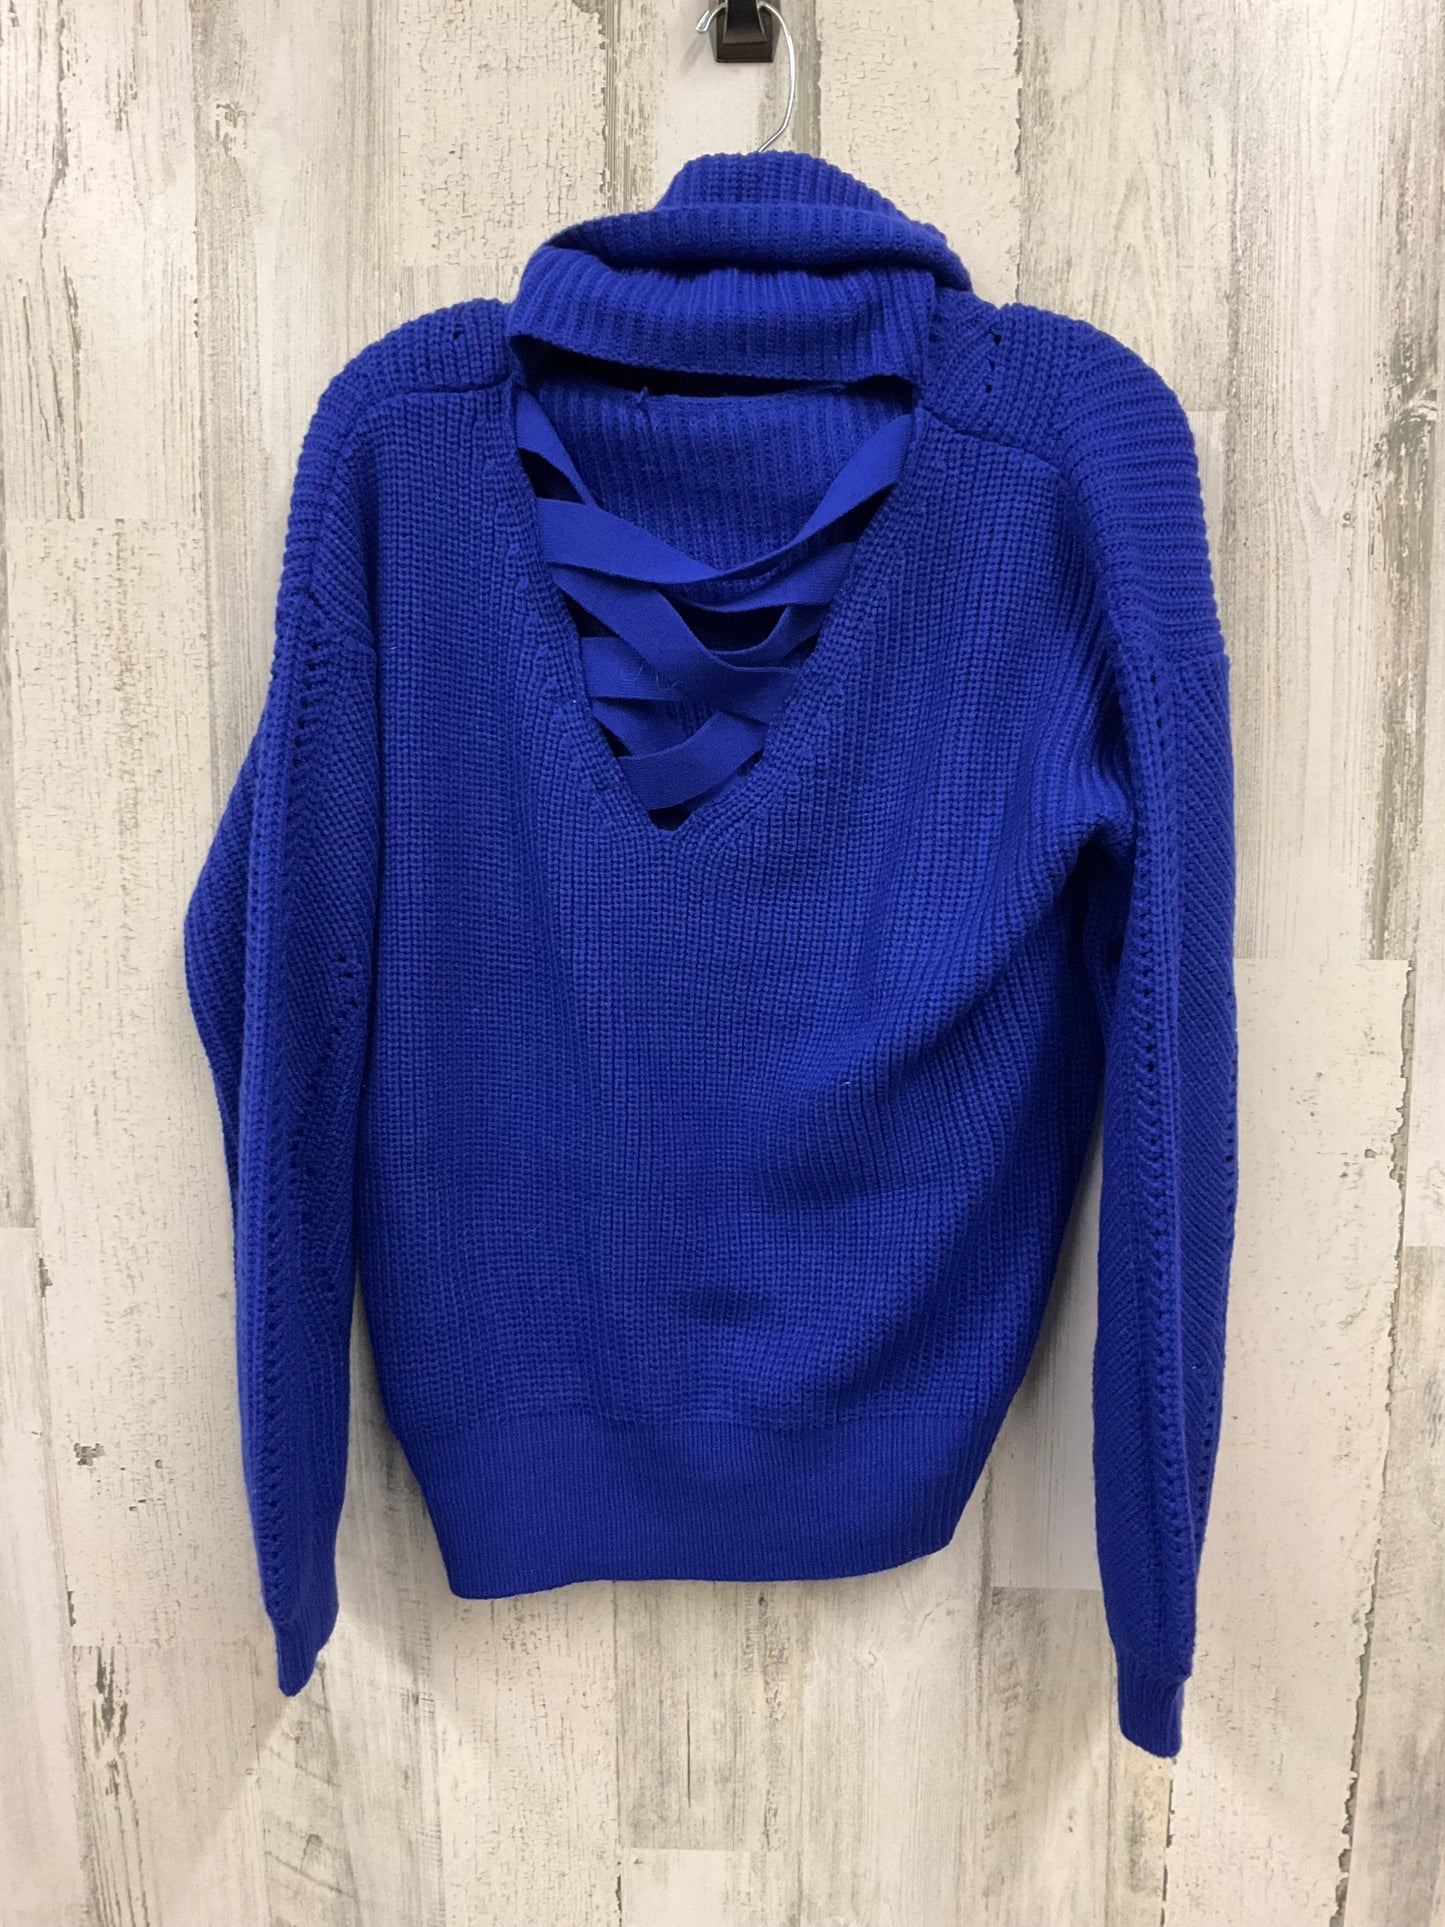 Sweater By Steve Madden  Size: M